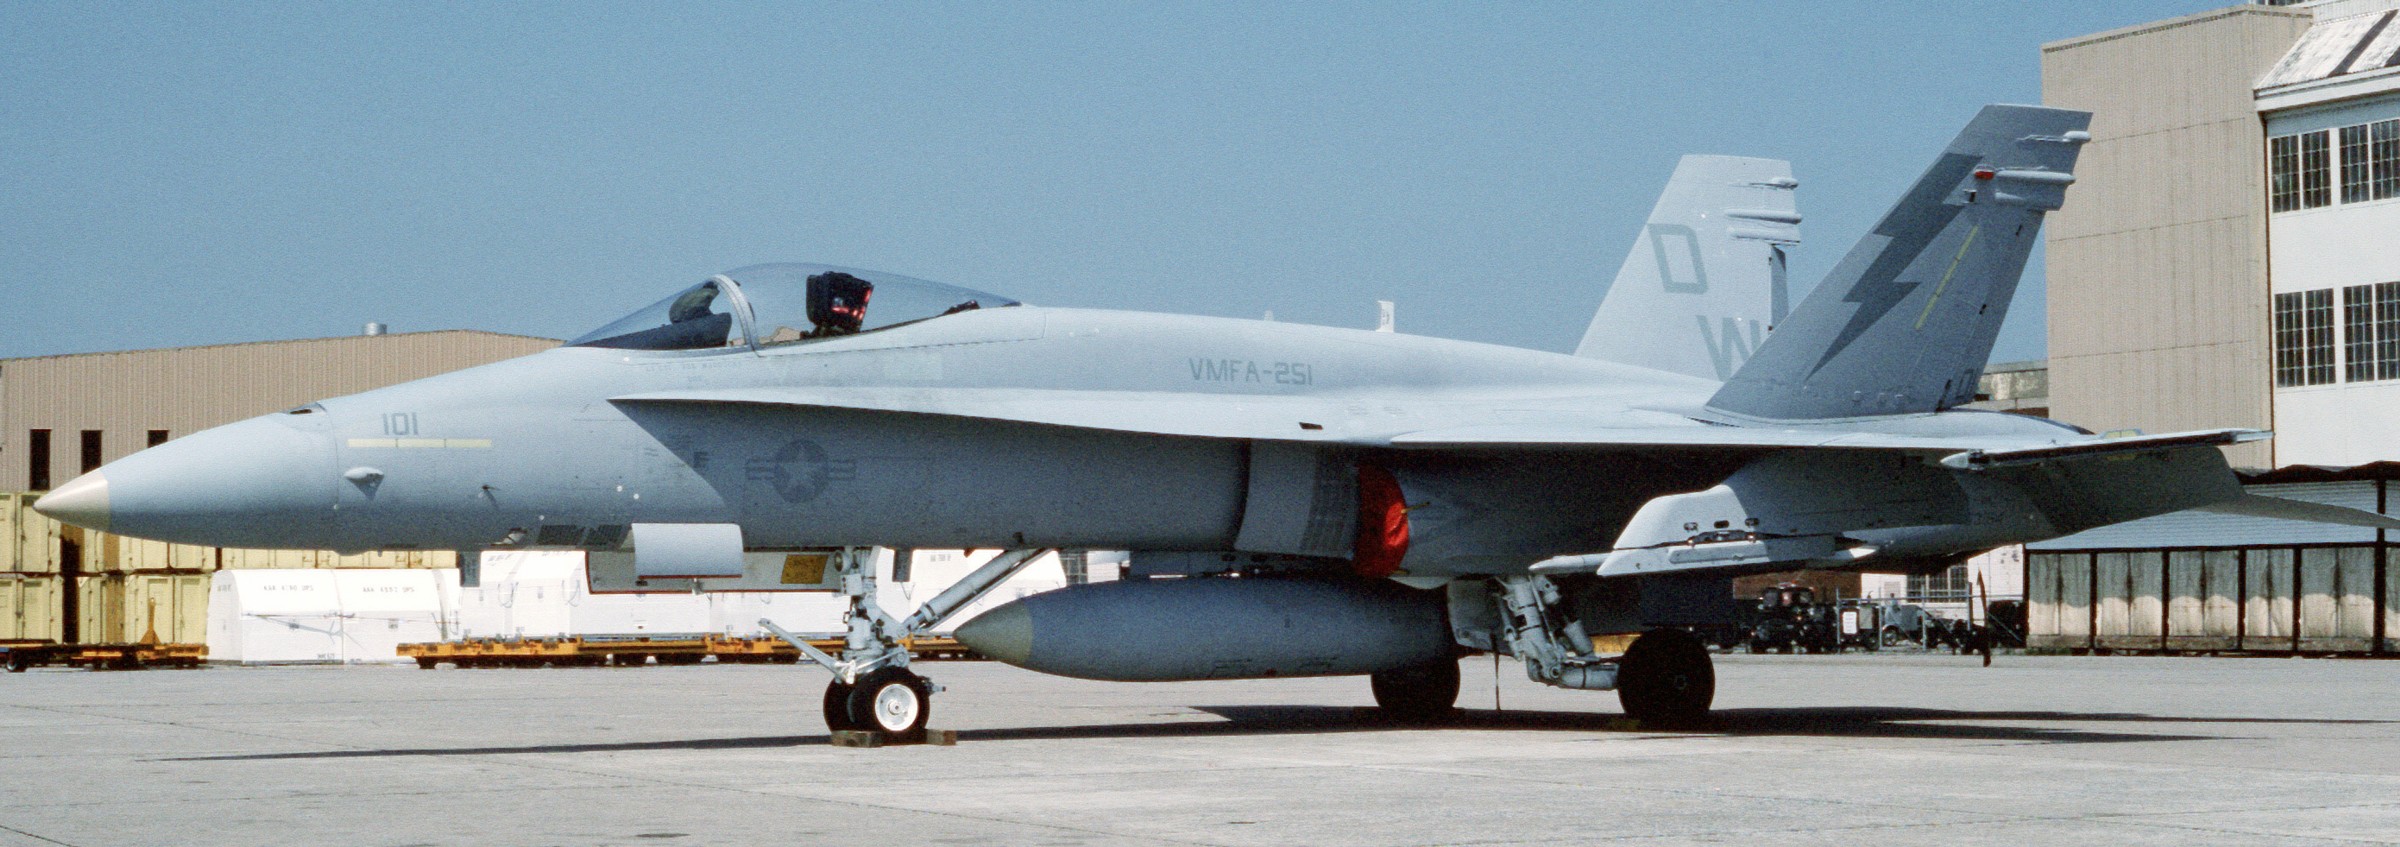 vmfa-251 thunderbolts marine fighter attack squadron f/a-18a hornet 53